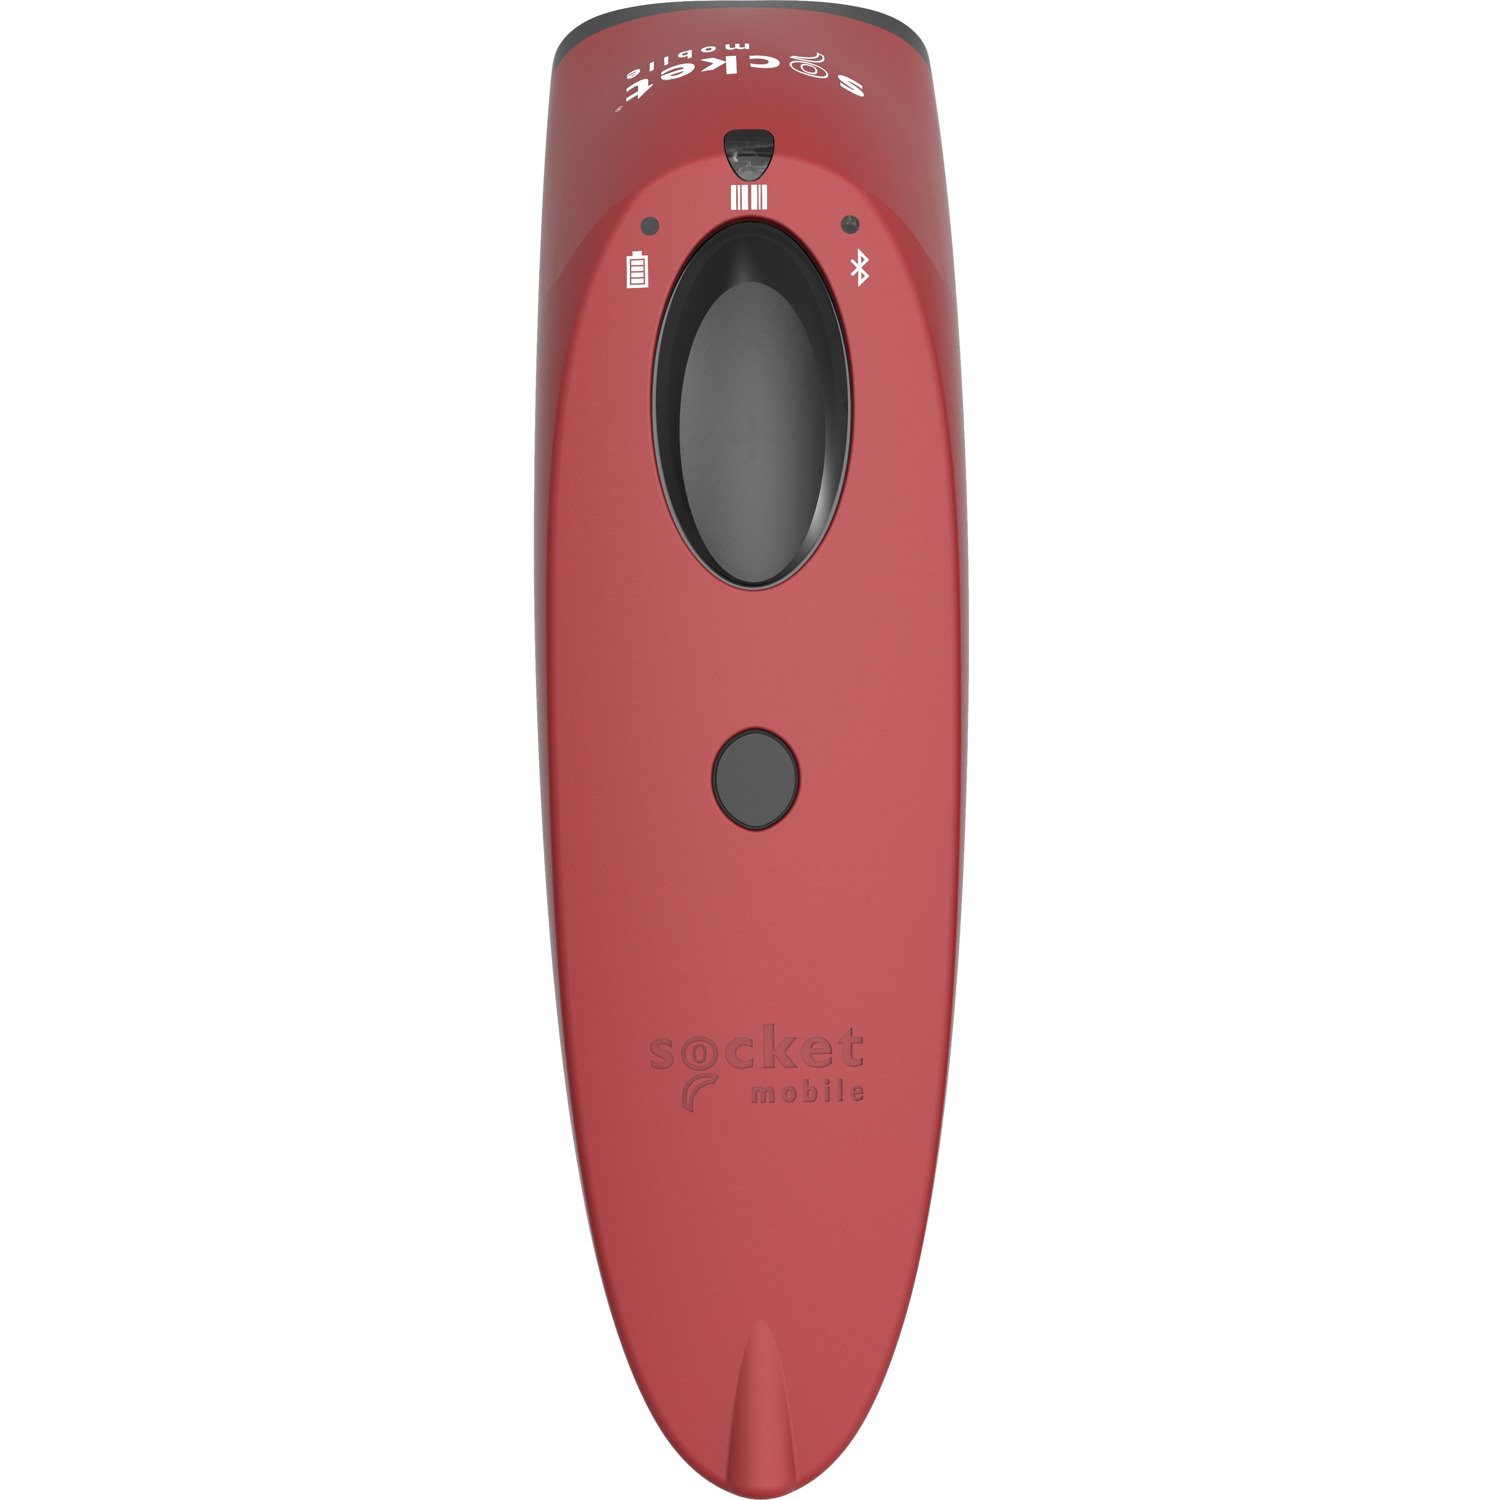 Socket Mobile SocketScan S700 Handheld Barcode Scanner - Wireless Connectivity - Red, White